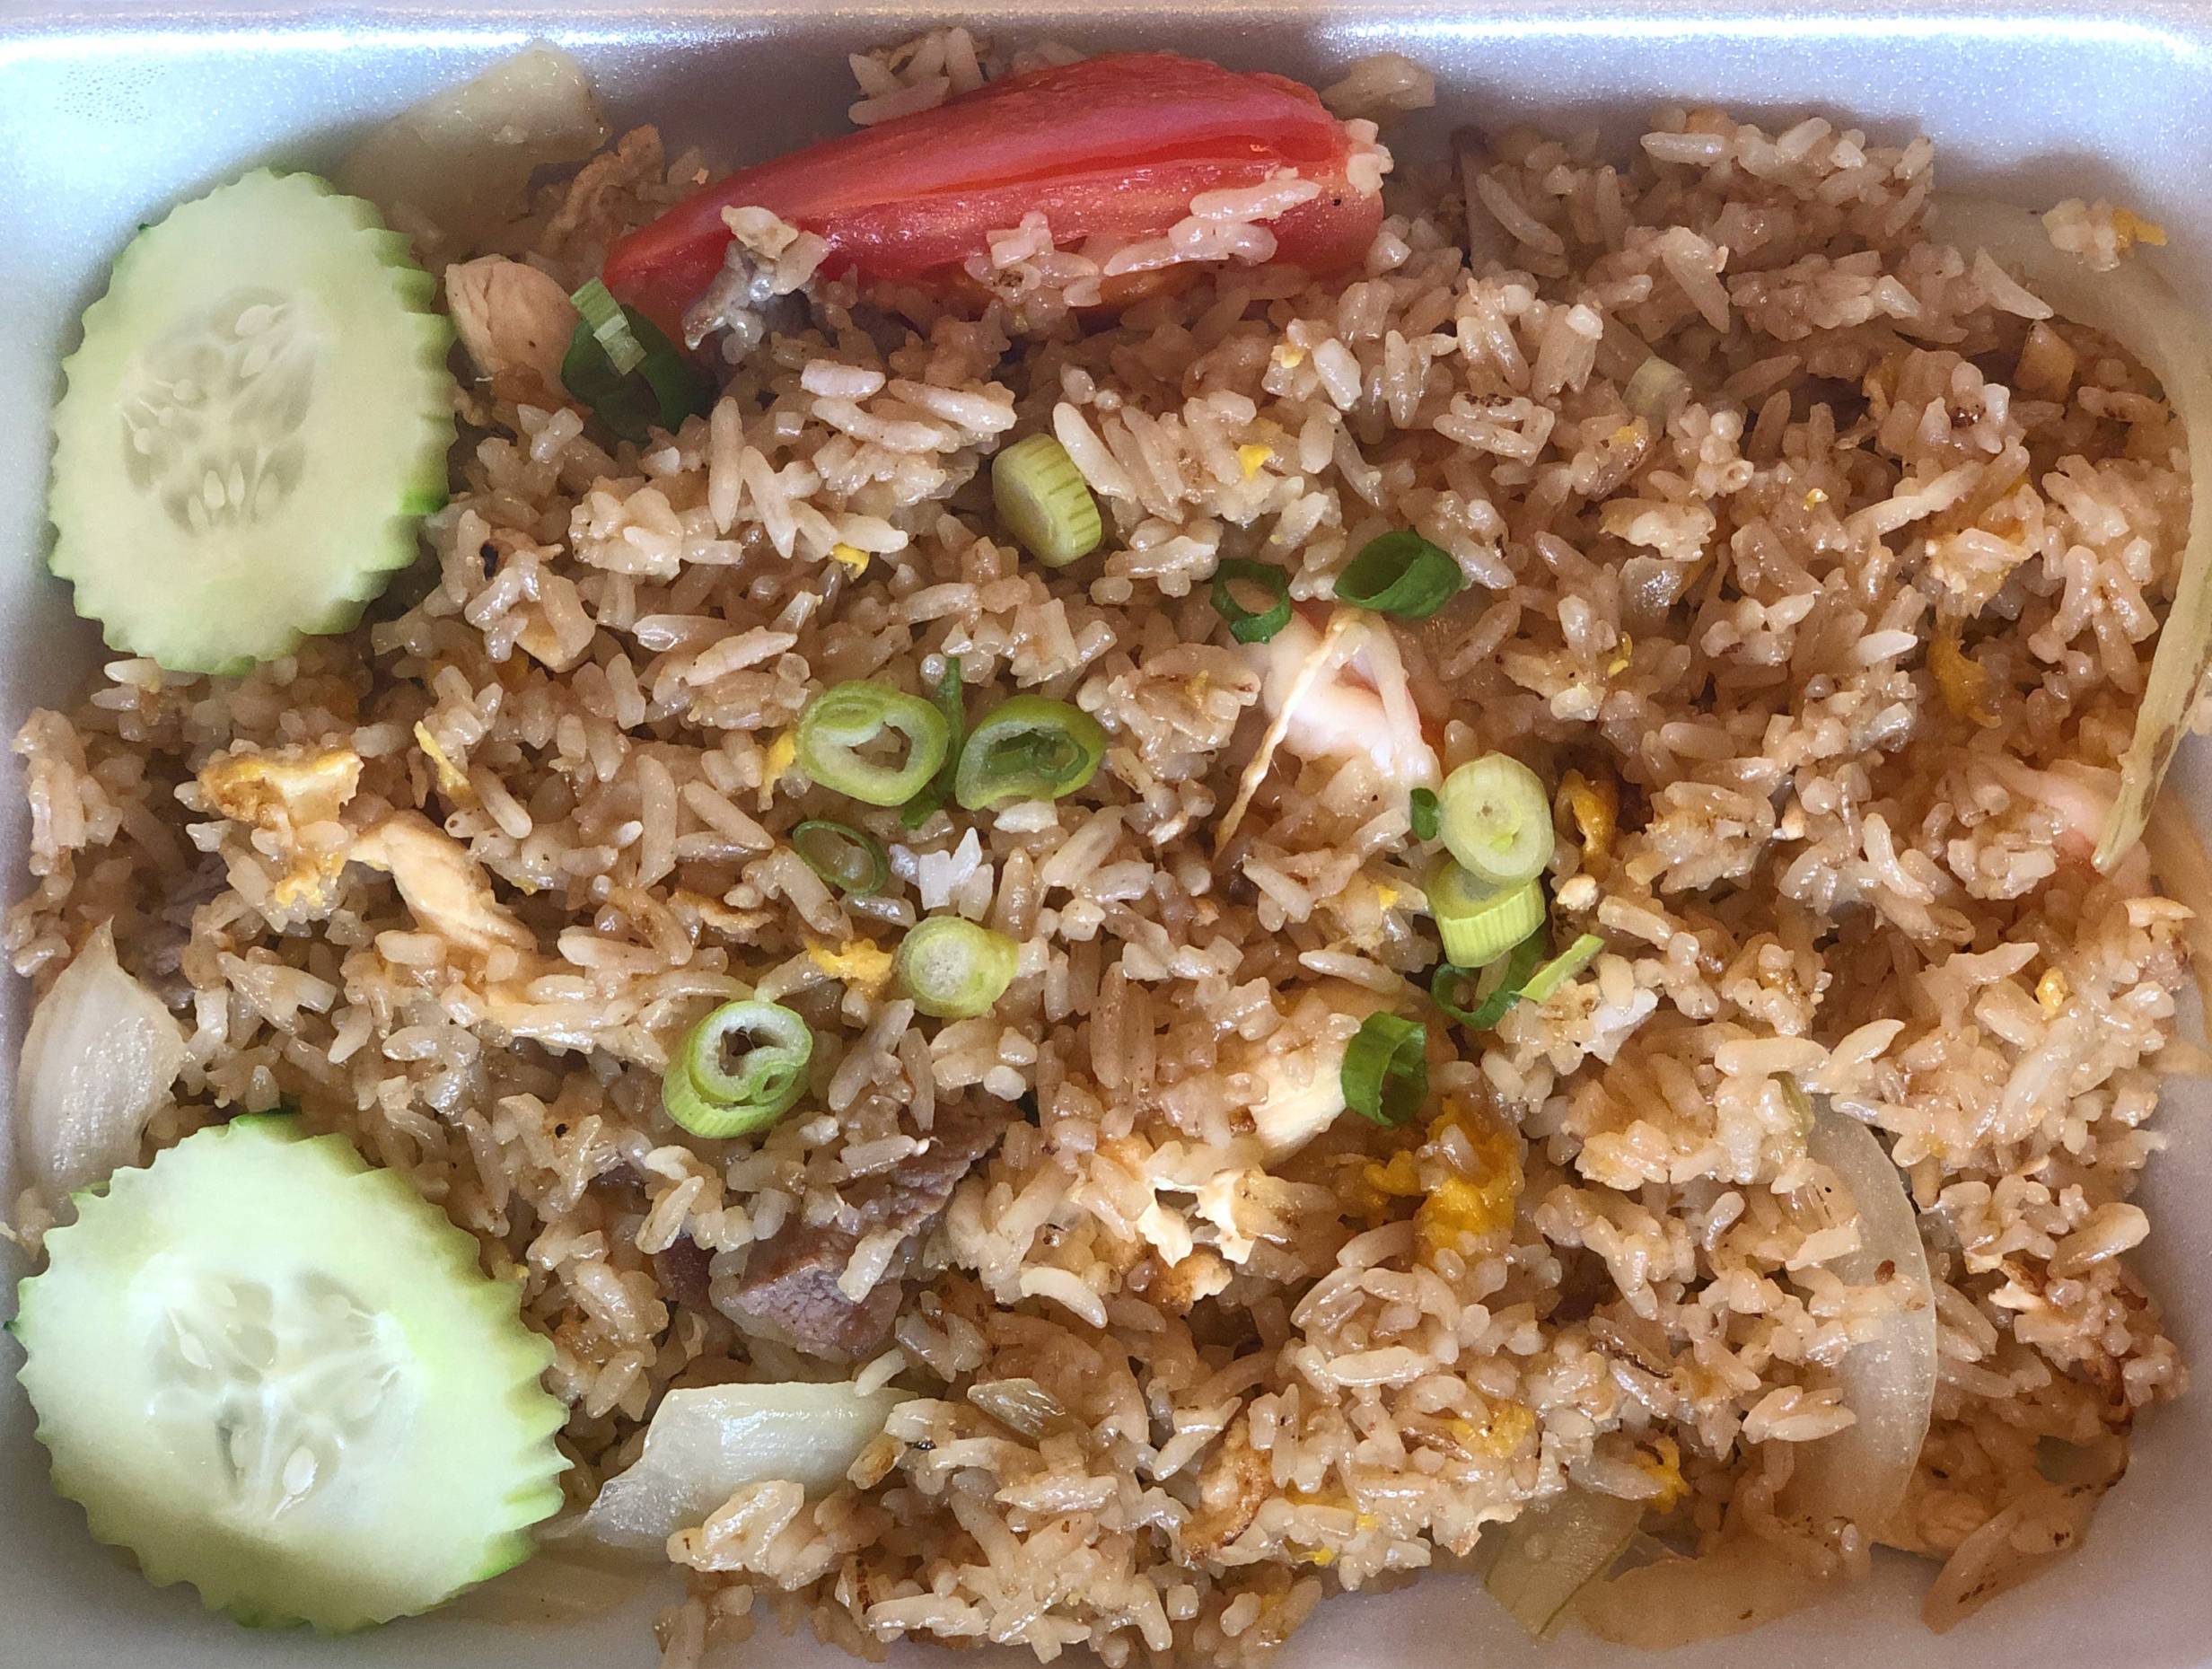 Siam Terrace fried rice has brown rice with scallions, beef, chicken, and shrimp. Two beautifully cut cucumber slices lay on the left side. Photo by Alyssa Buckley.